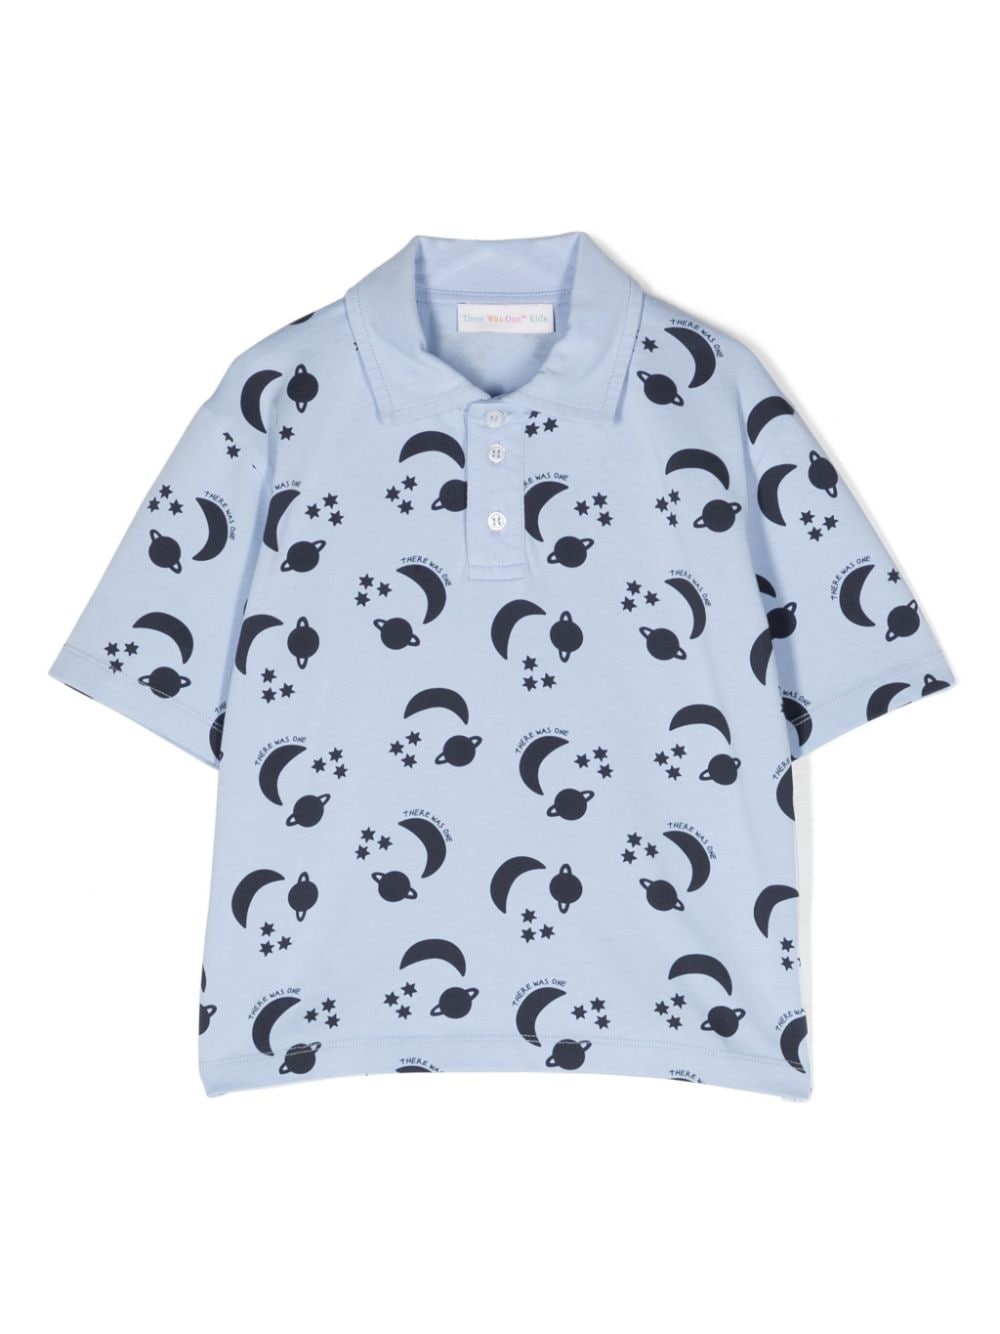 There Was One Kids Poloshirt mit Himmels-Print - Blau von There Was One Kids